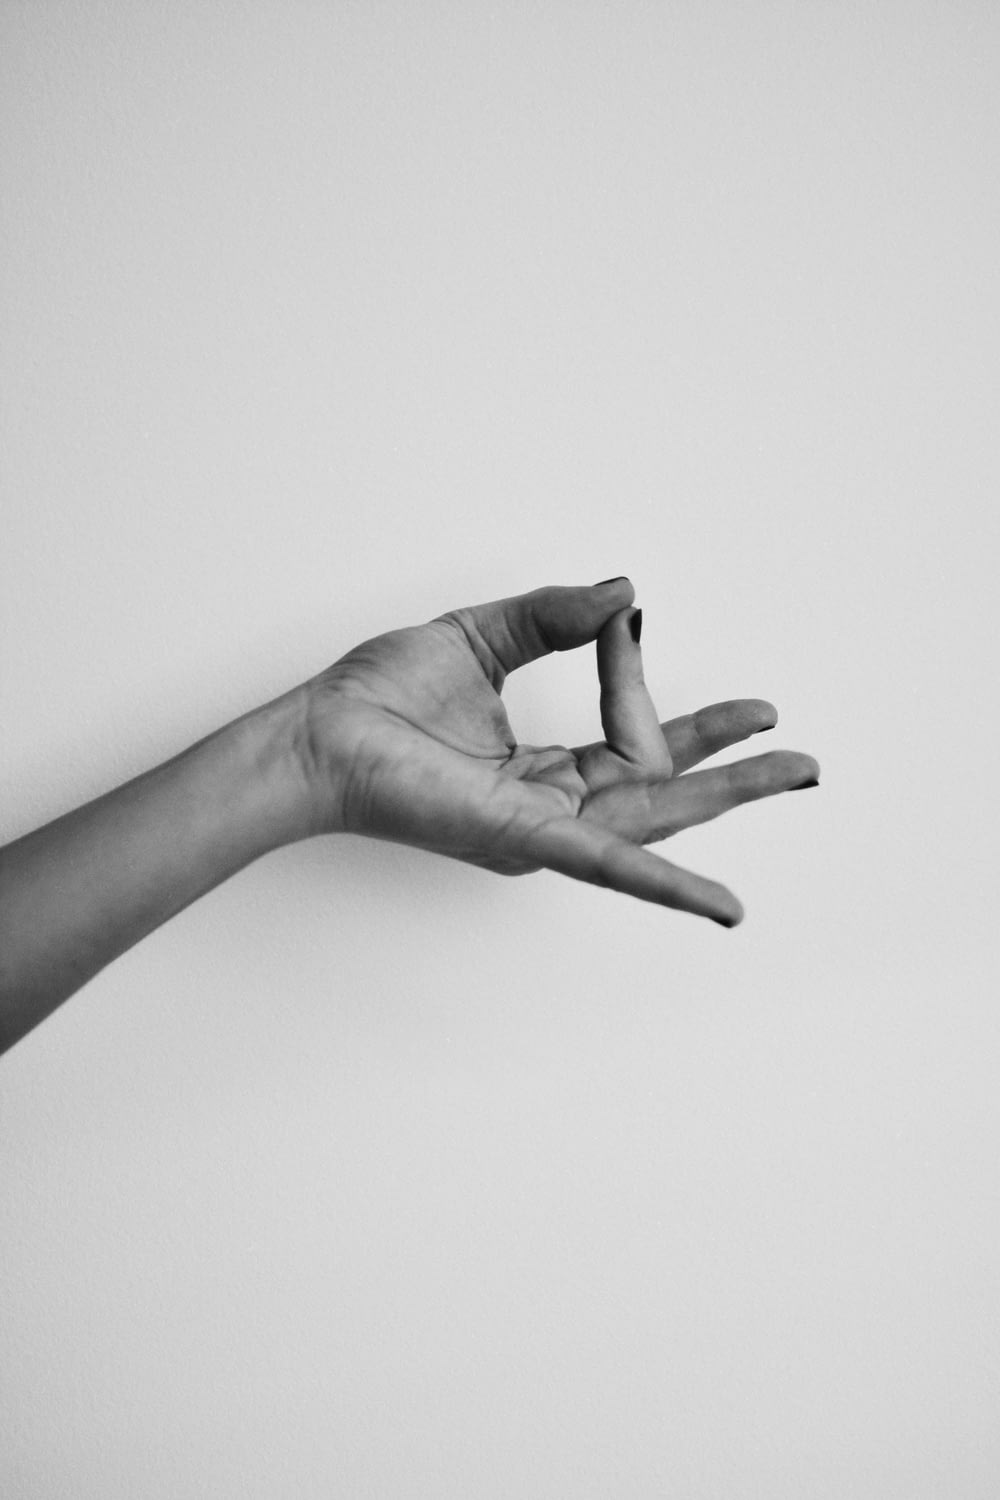 a black and white photo of a person's hand reaching for something